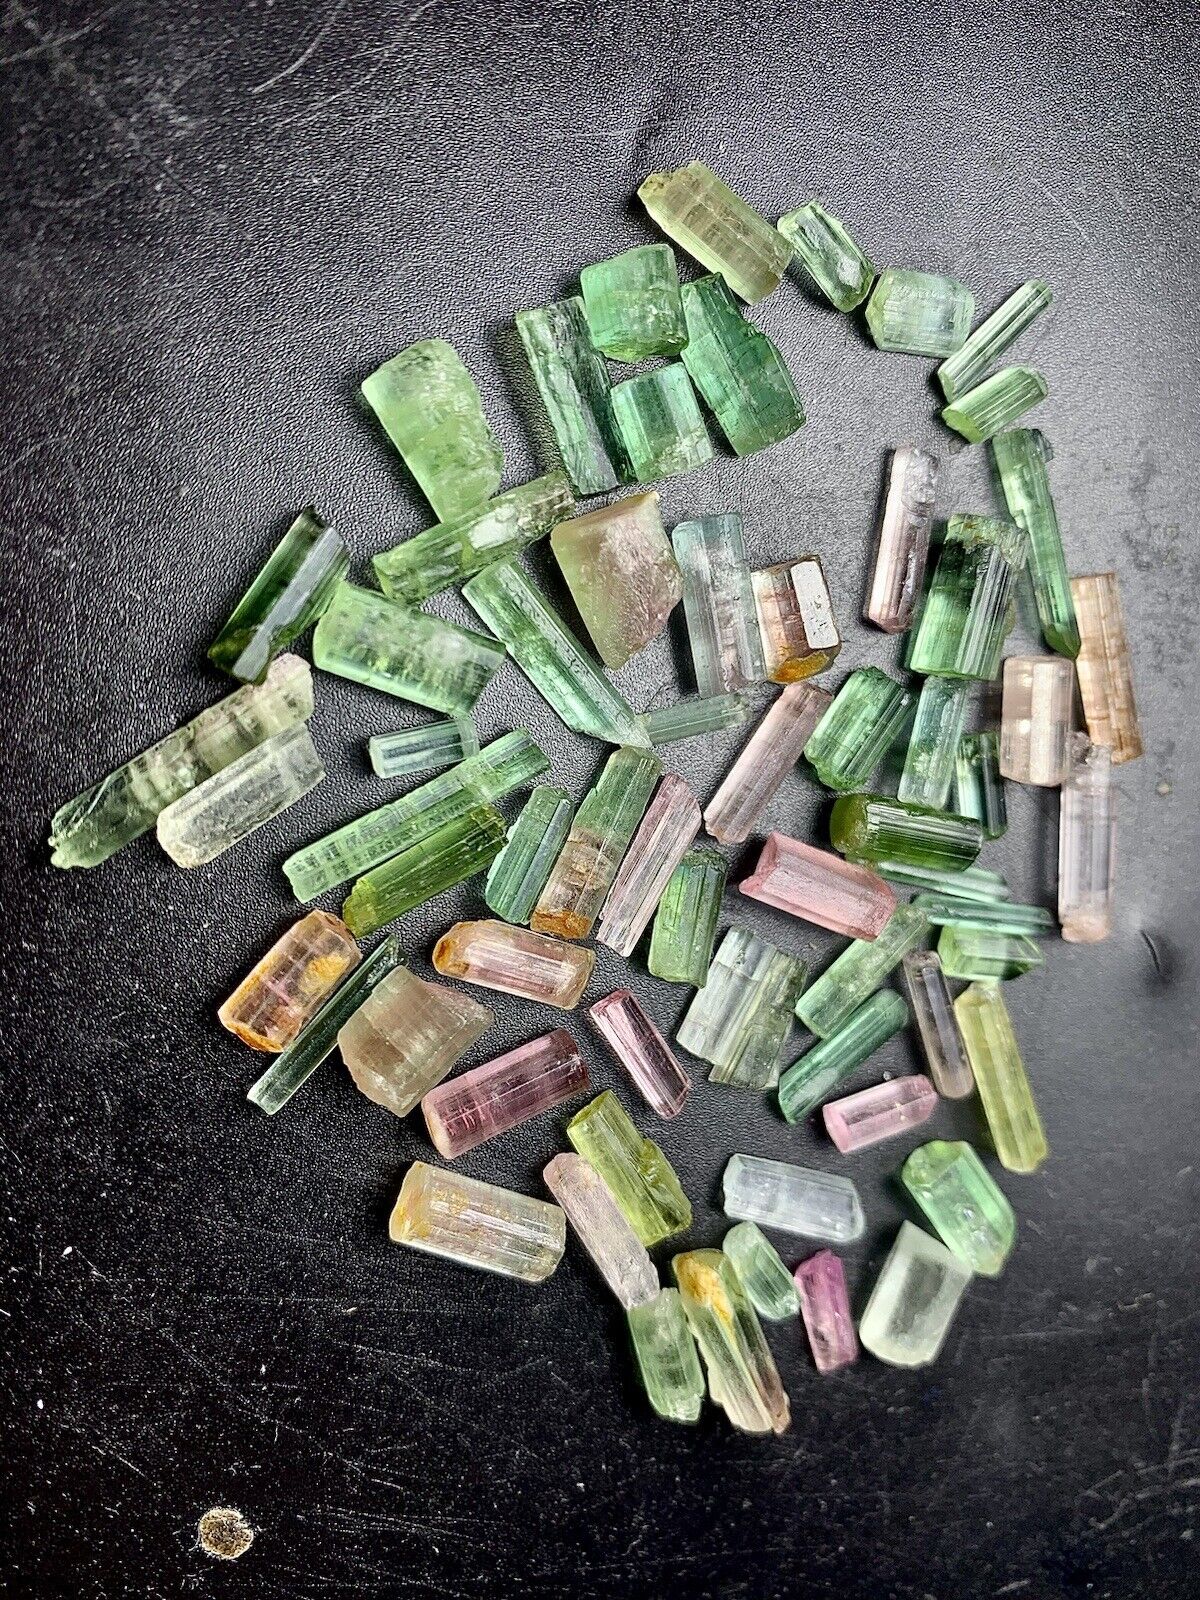 102 Carat Lot Of BiColour Tourmaline Crystals From Afghanistan